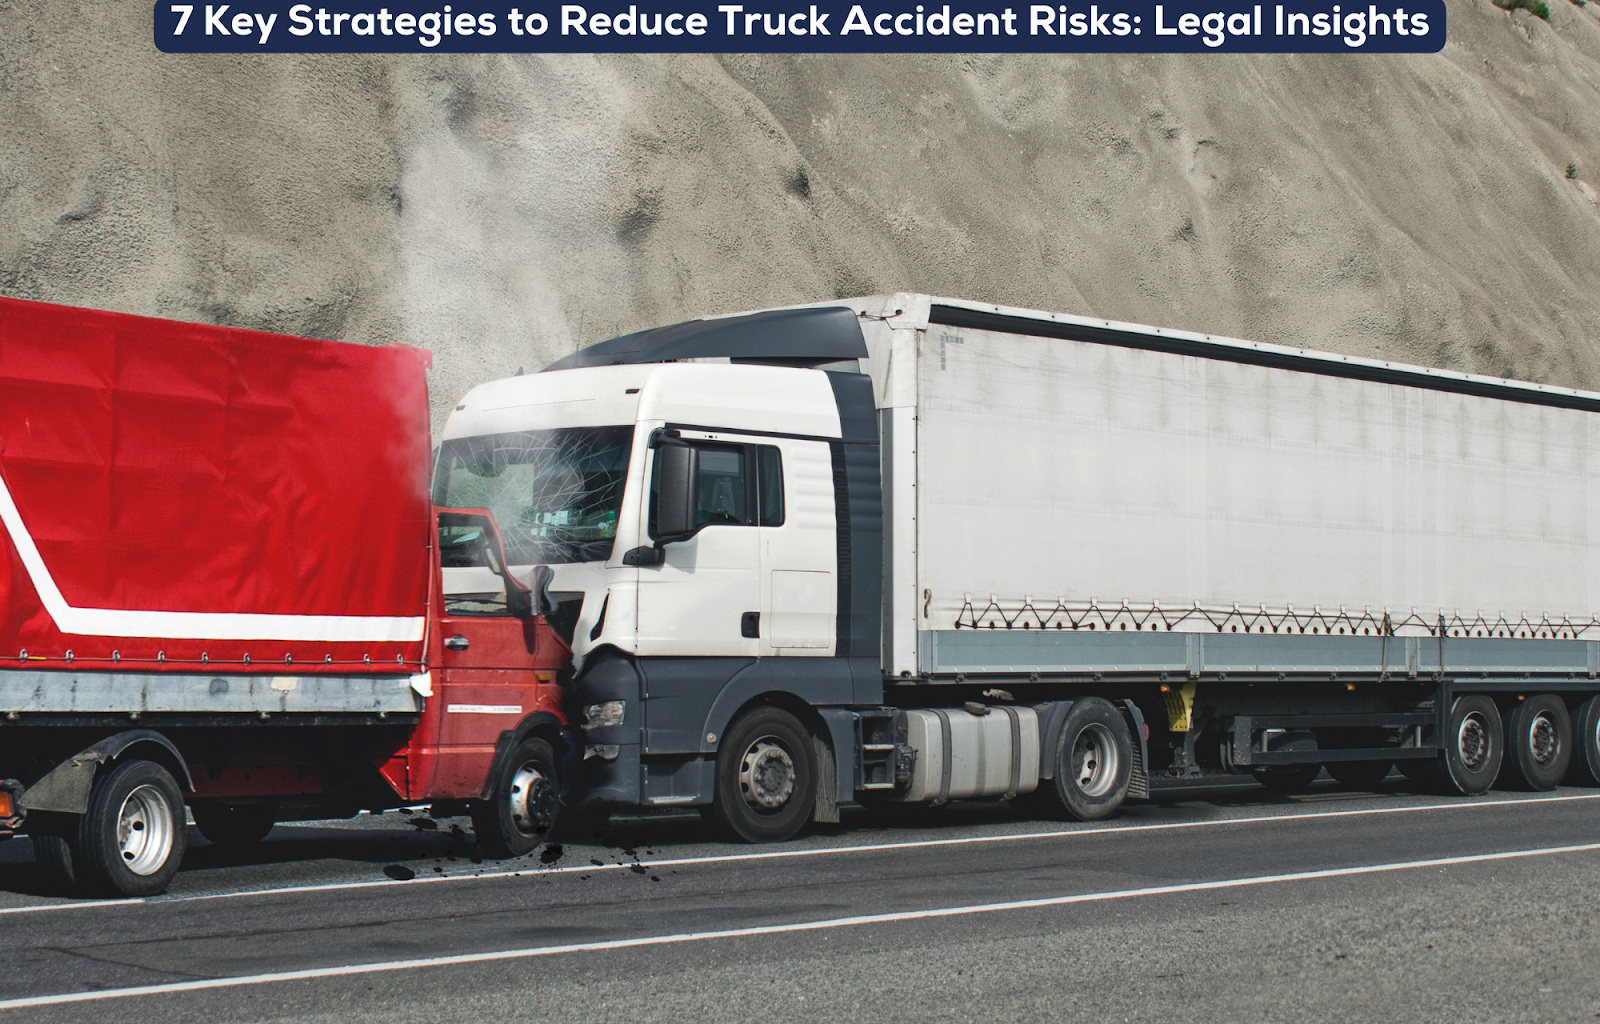 Strategies to Reduce Truck Accident Risks